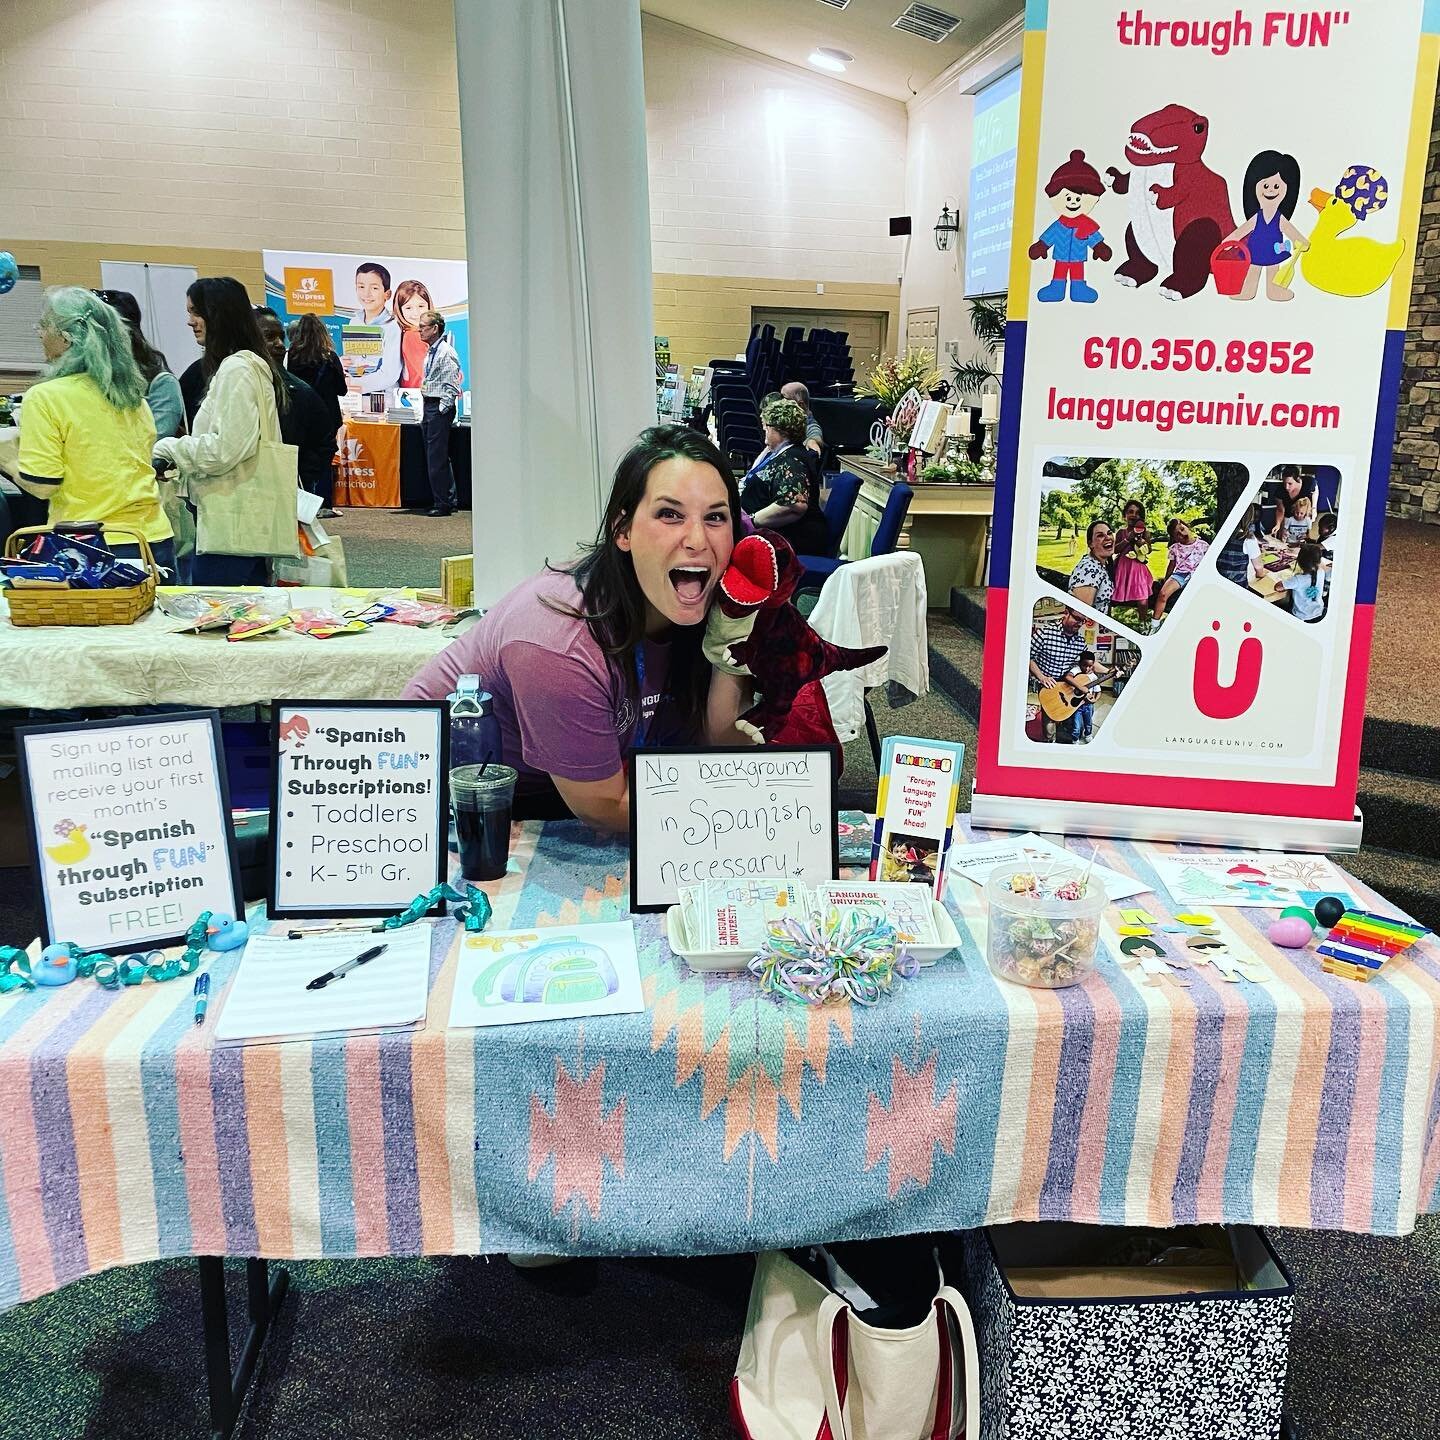 We are ready for the Tri-State Homeschool Conference! FREE first-month &ldquo;Spanish through FUN&rdquo; subscriptions for families and teachers! PM to get the same deal!
#tshsconf2023 #homeschool #homeschoolforeignlanguage #spanishforkids